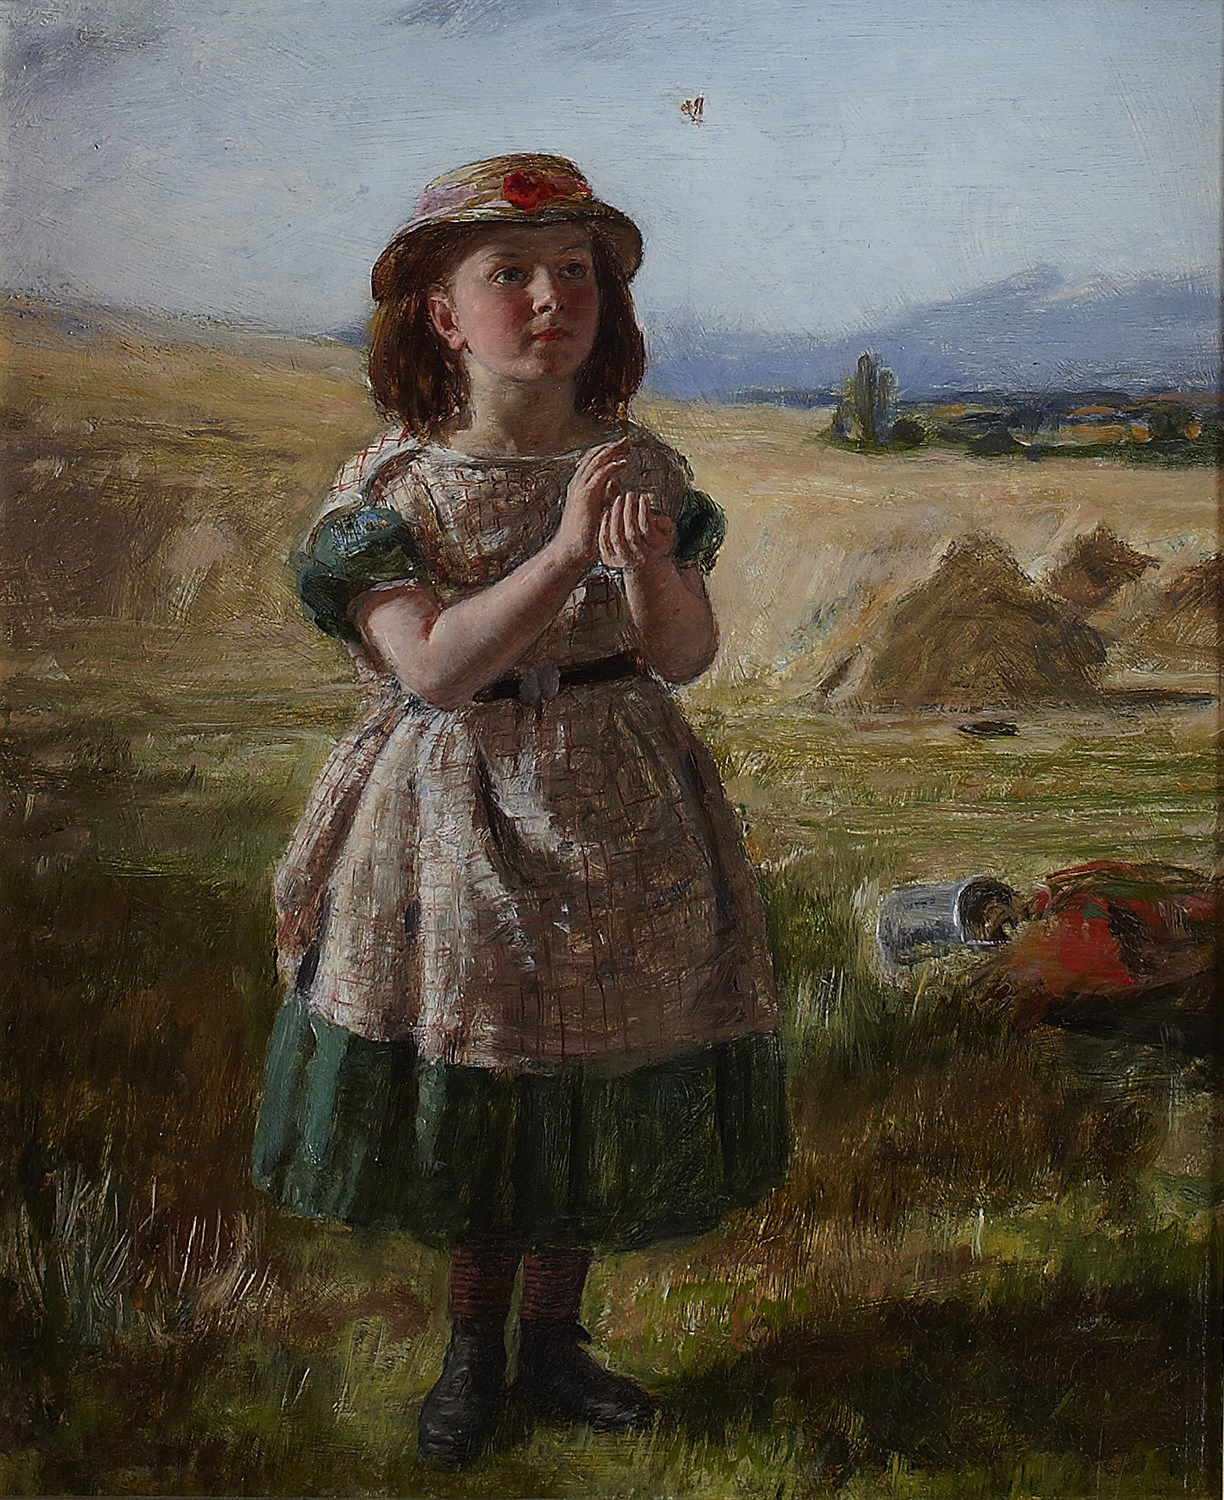 Lot 51 - WILLIAM MCTAGGART R.S.A., R.S.W (SCOTTISH 1835-1910)